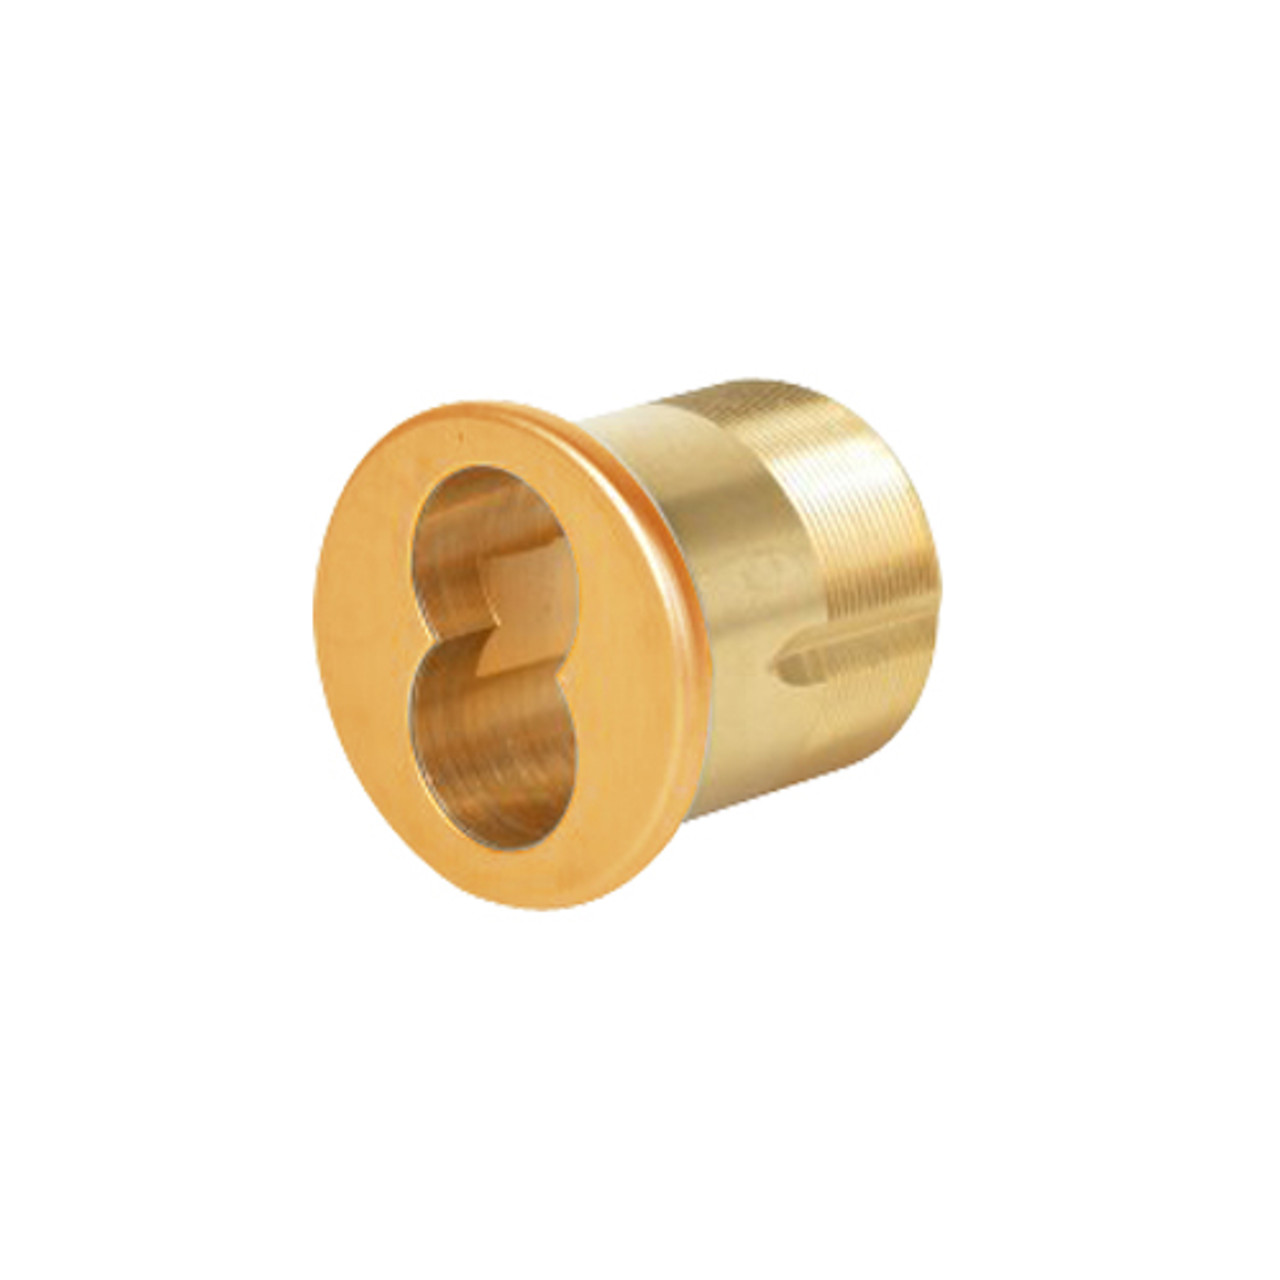 CR1070-134-A01-6-612 Corbin Mortise Interchangeable Core Housing with Cloverleaf Cam in Satin Bronze Finish